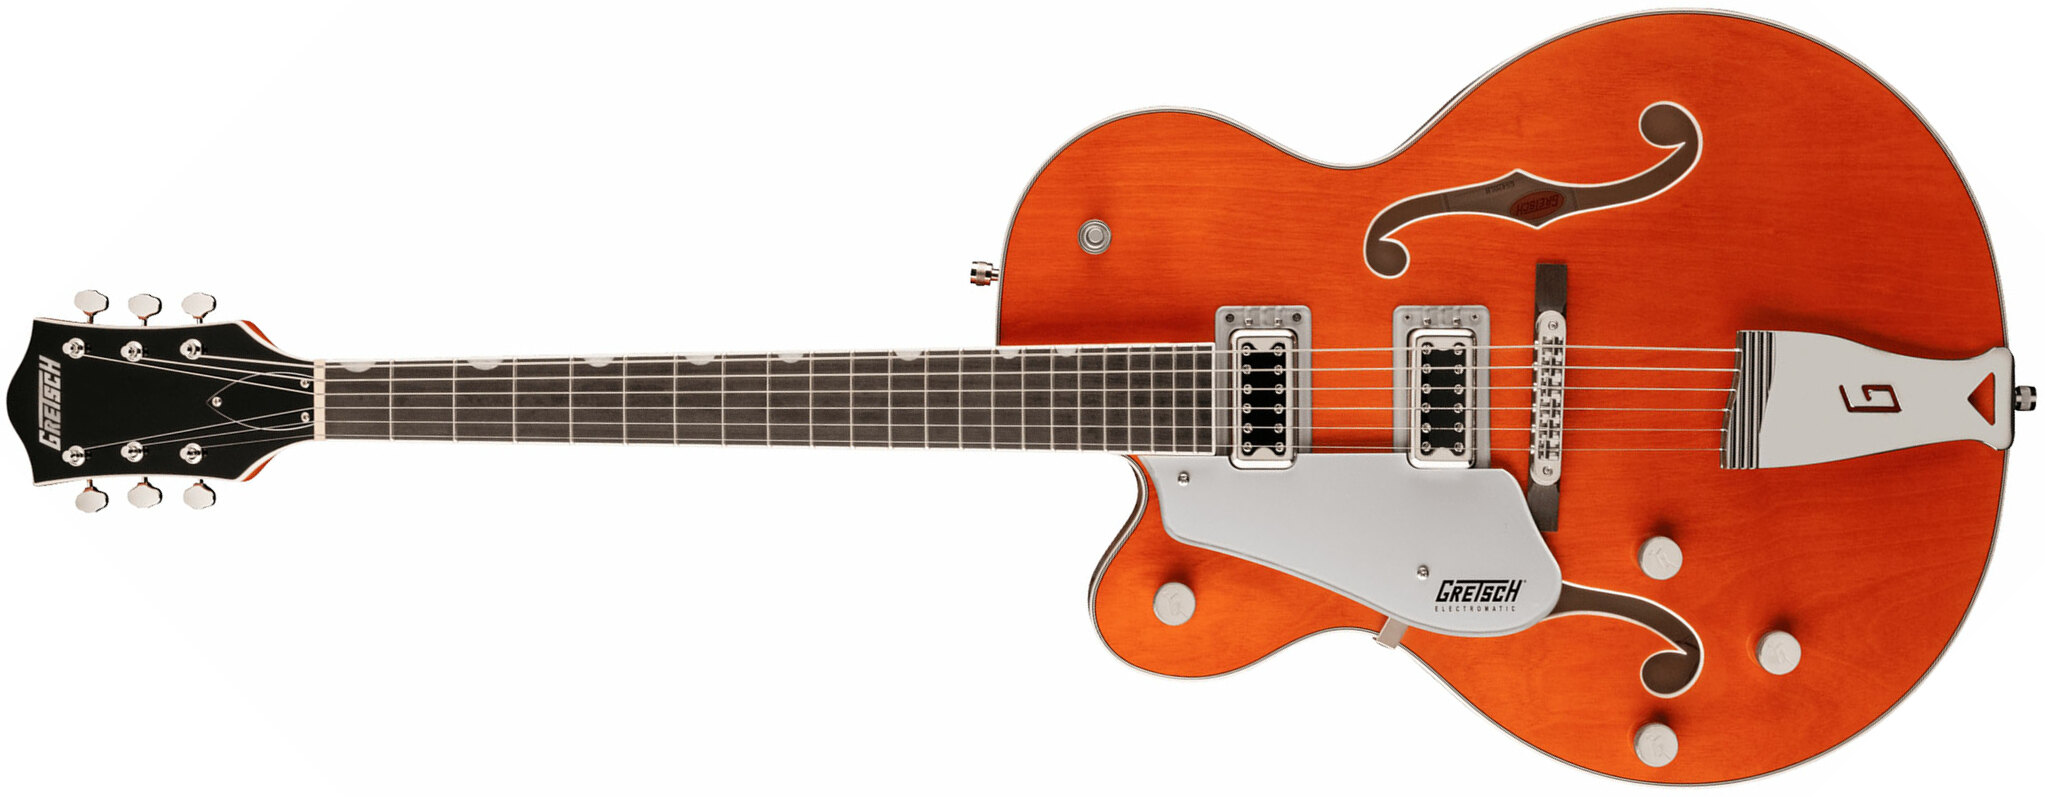 Gretsch G5420lh Classic Electromatic Hollow Body Gaucher Hh Ht Lau - Orange Stain - Left-handed electric guitar - Main picture